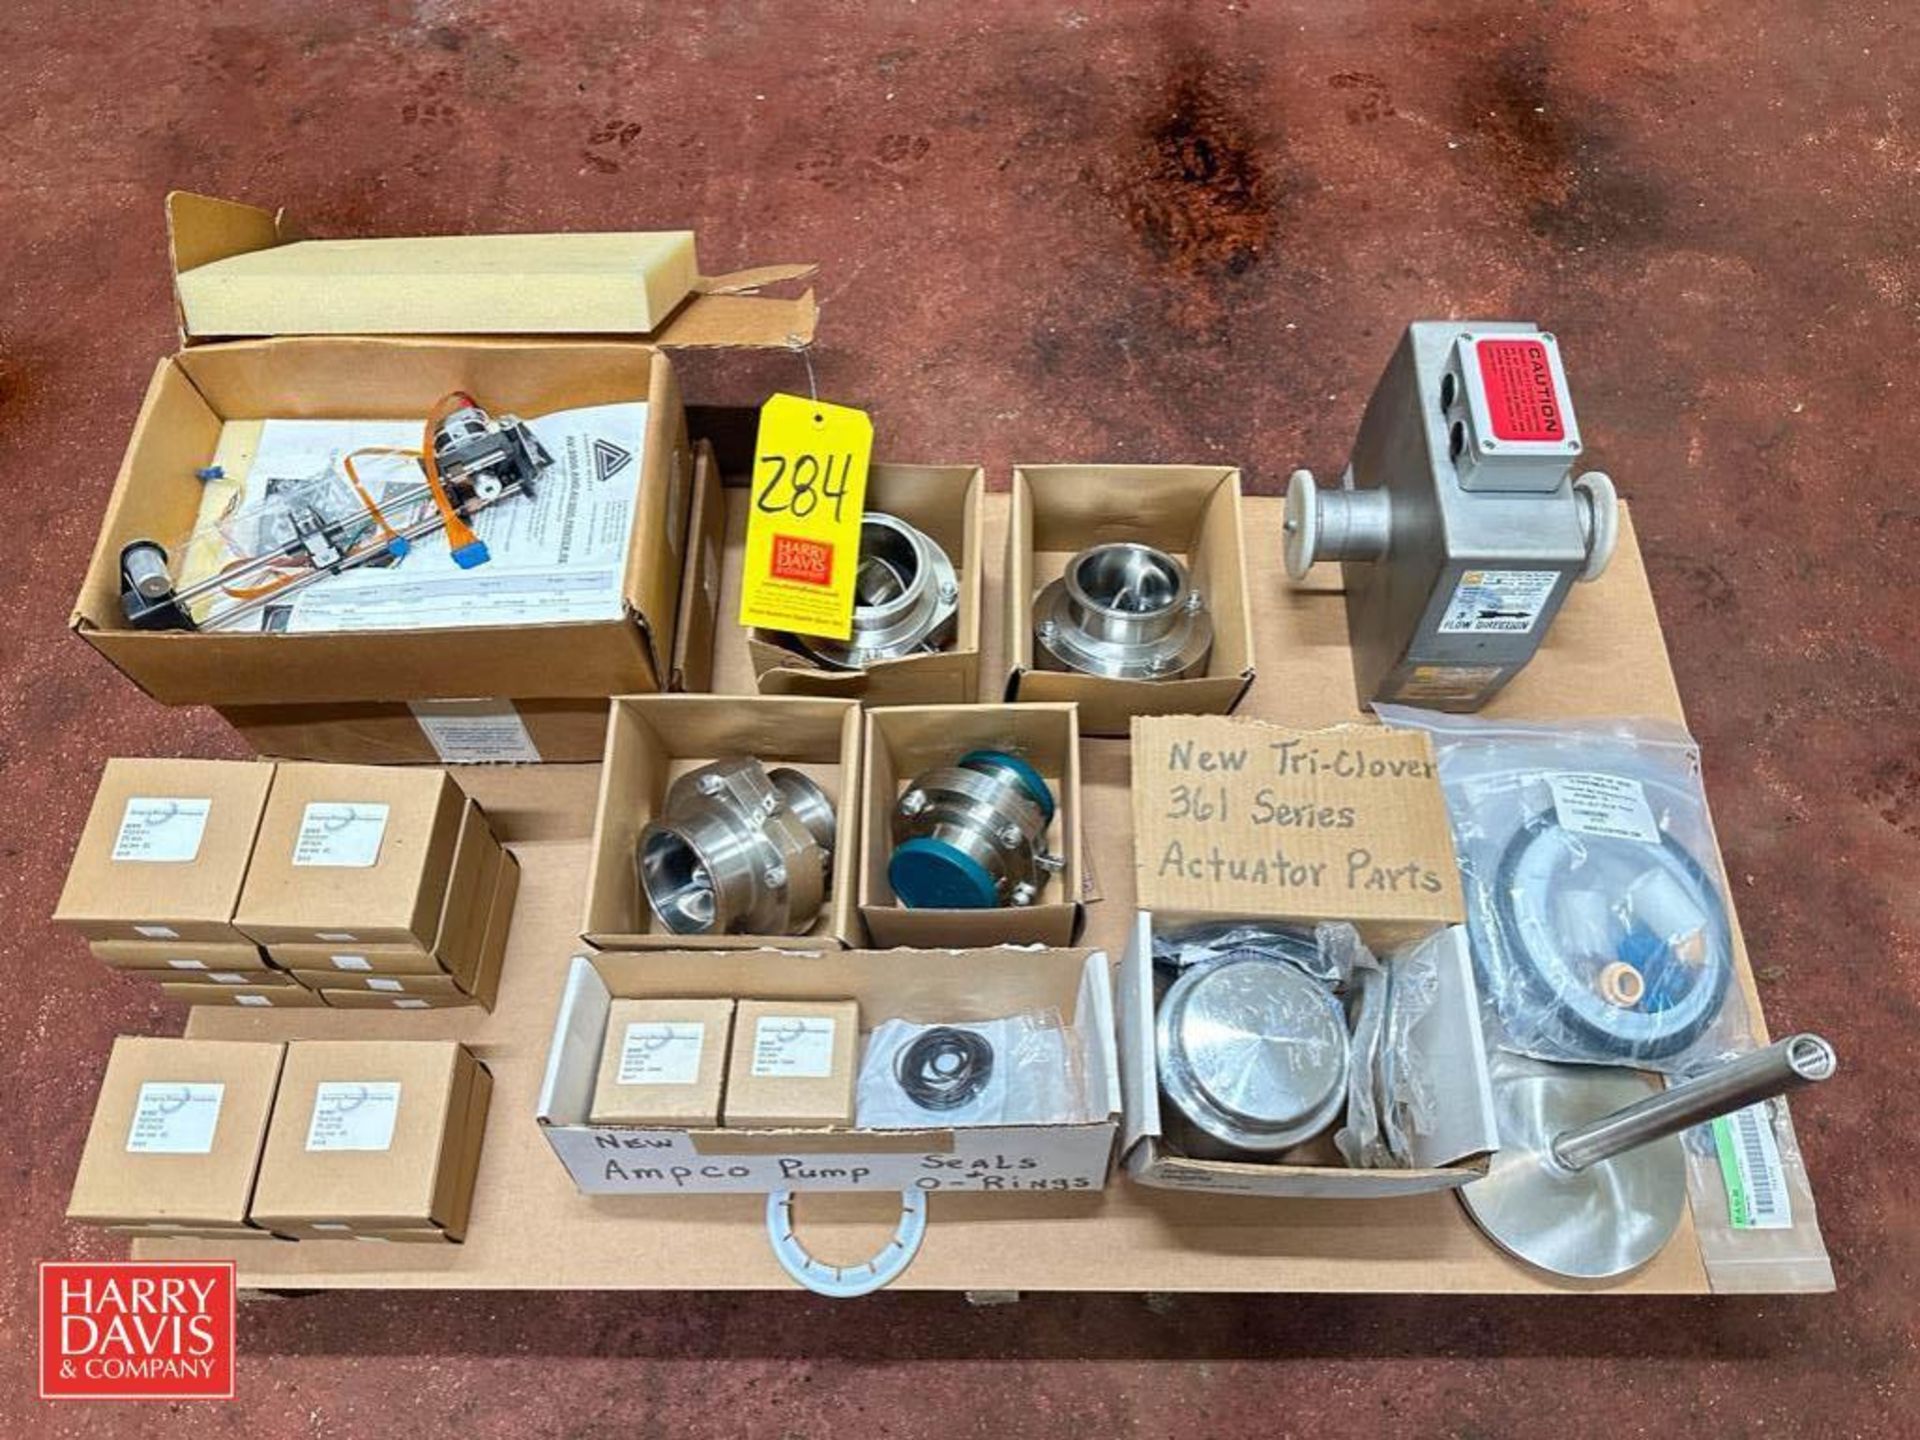 NEW Anderson Chart Recorder Parts, Tri-Clover Value Parts, (4) Alfa Laval Butterfly Valves, Accurate